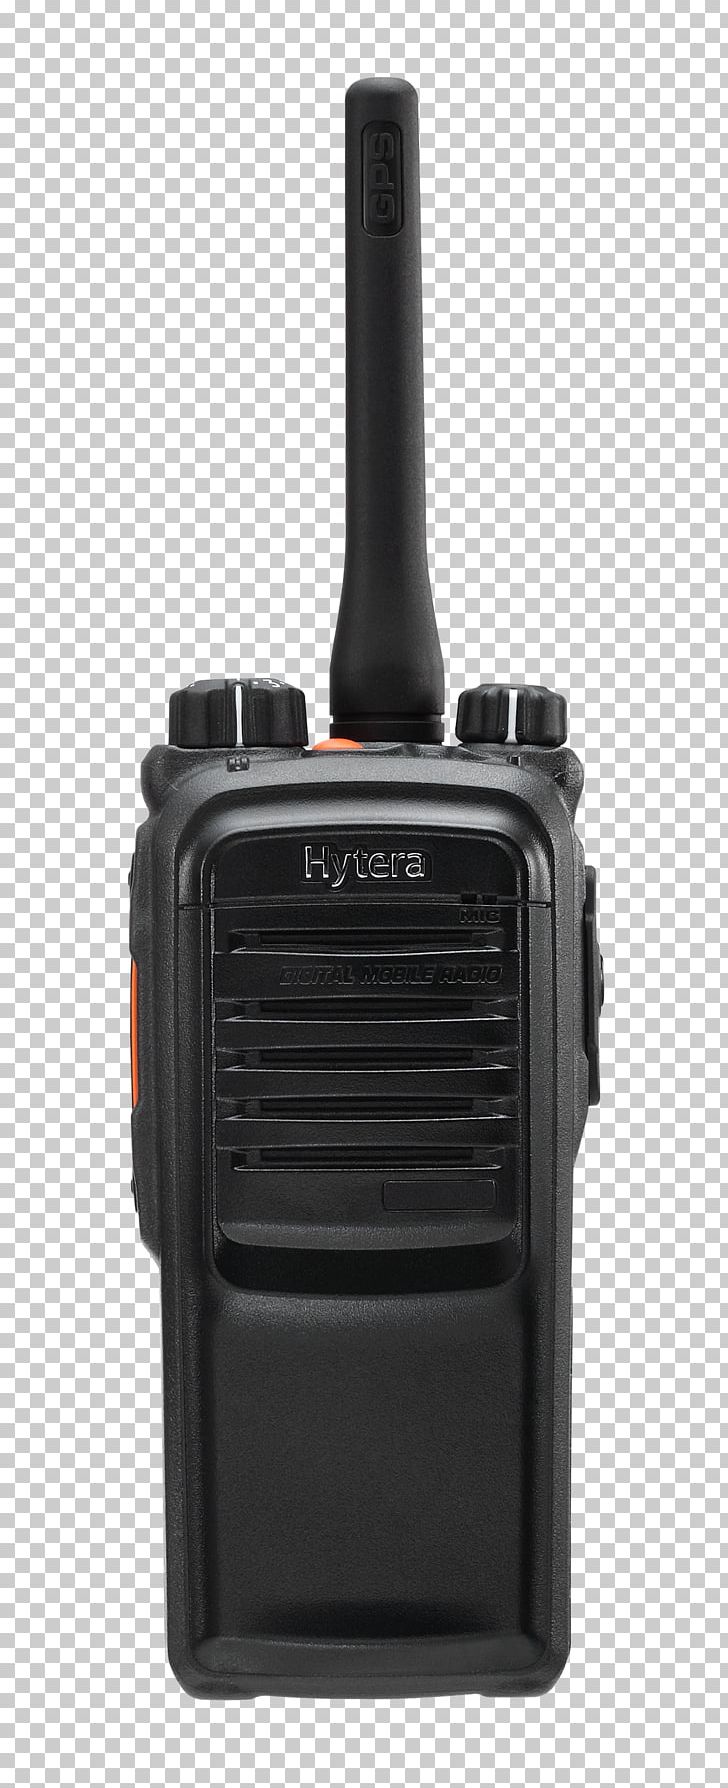 Handheld Two-Way Radios Hytera Digital Mobile Radio Radio Station PNG, Clipart, Audio, Bluetooth Audio, Communication Channel, Communication Device, Connectivity Free PNG Download